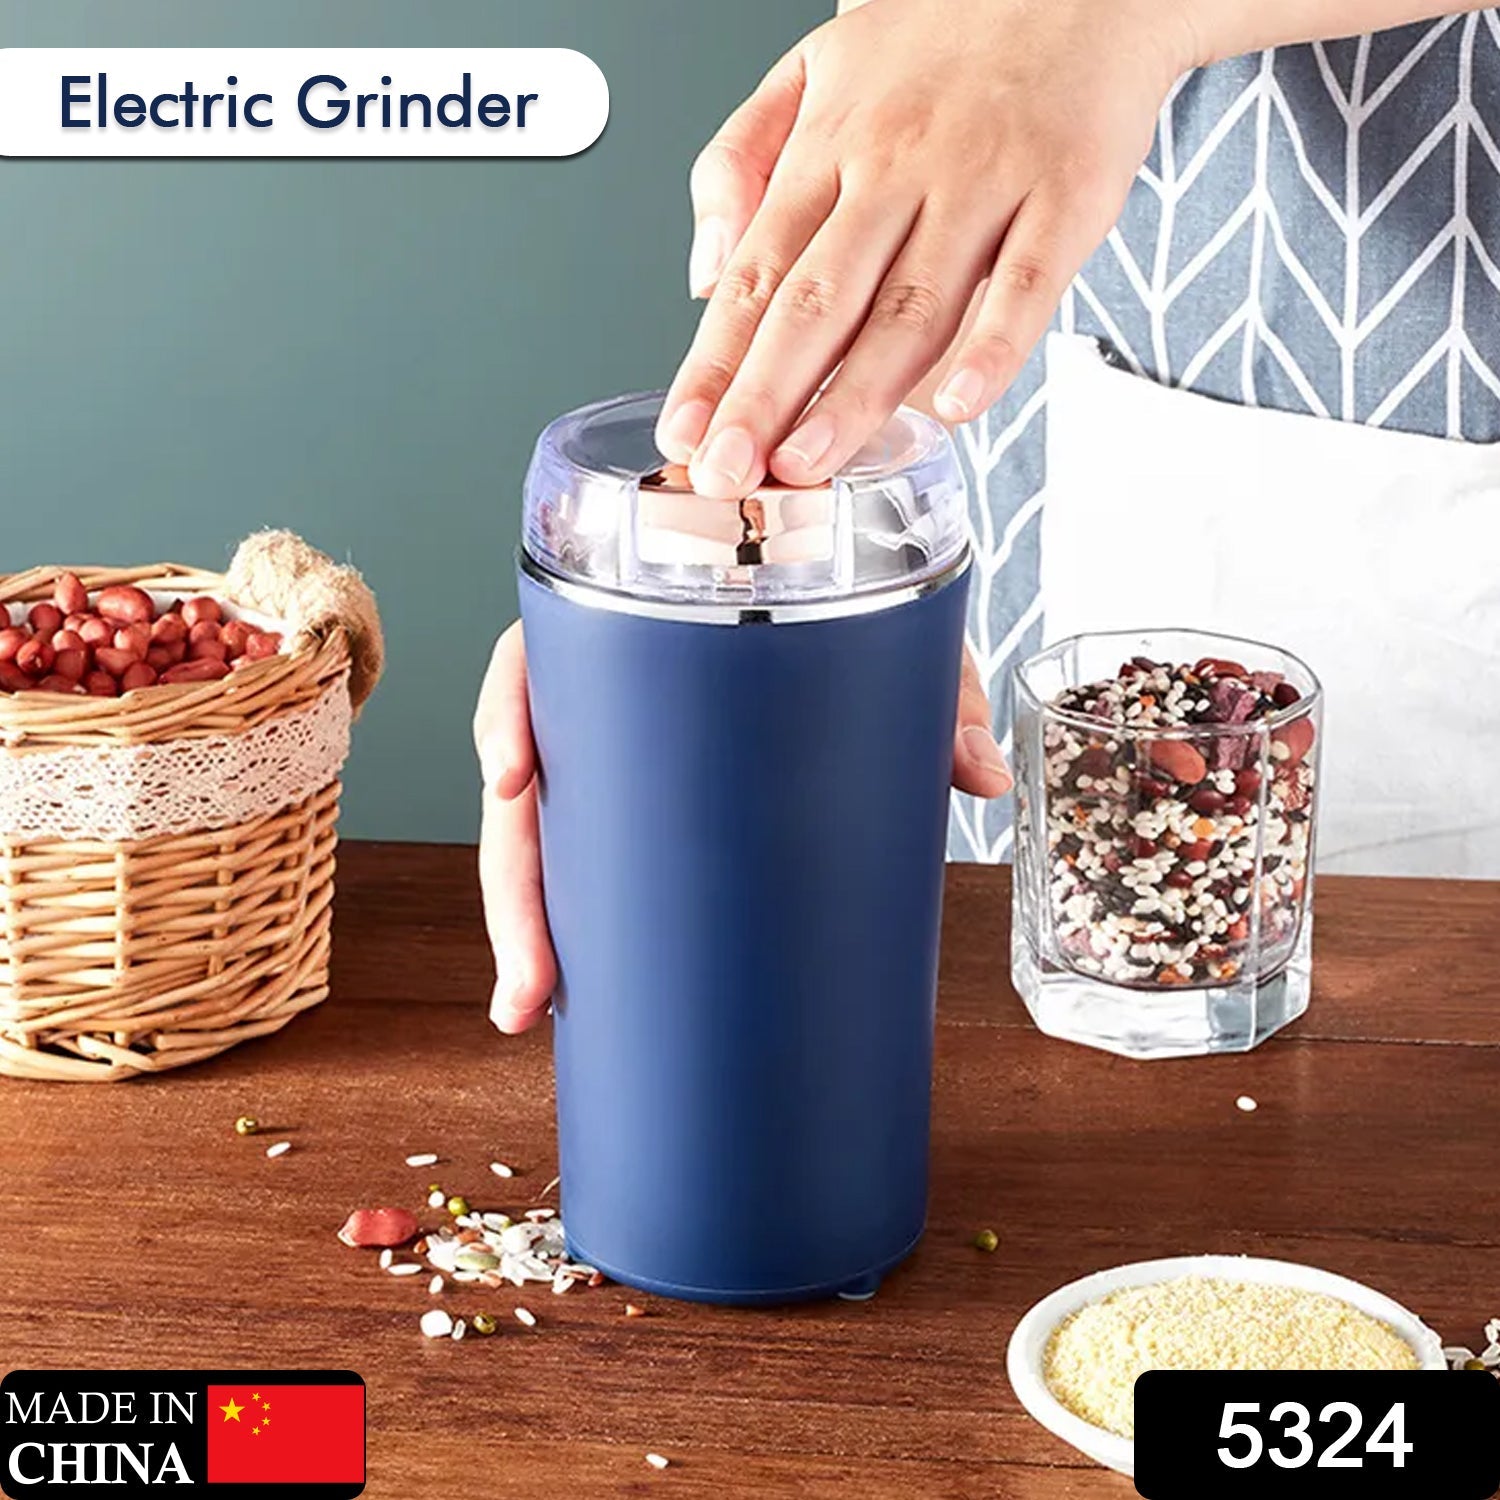 5324 Mini Mixer, Small Blander, Power full Mini Grinder, Electric Coffee Bean Grinder Grinder Machine Portable Grinder for Home and Office. DeoDap